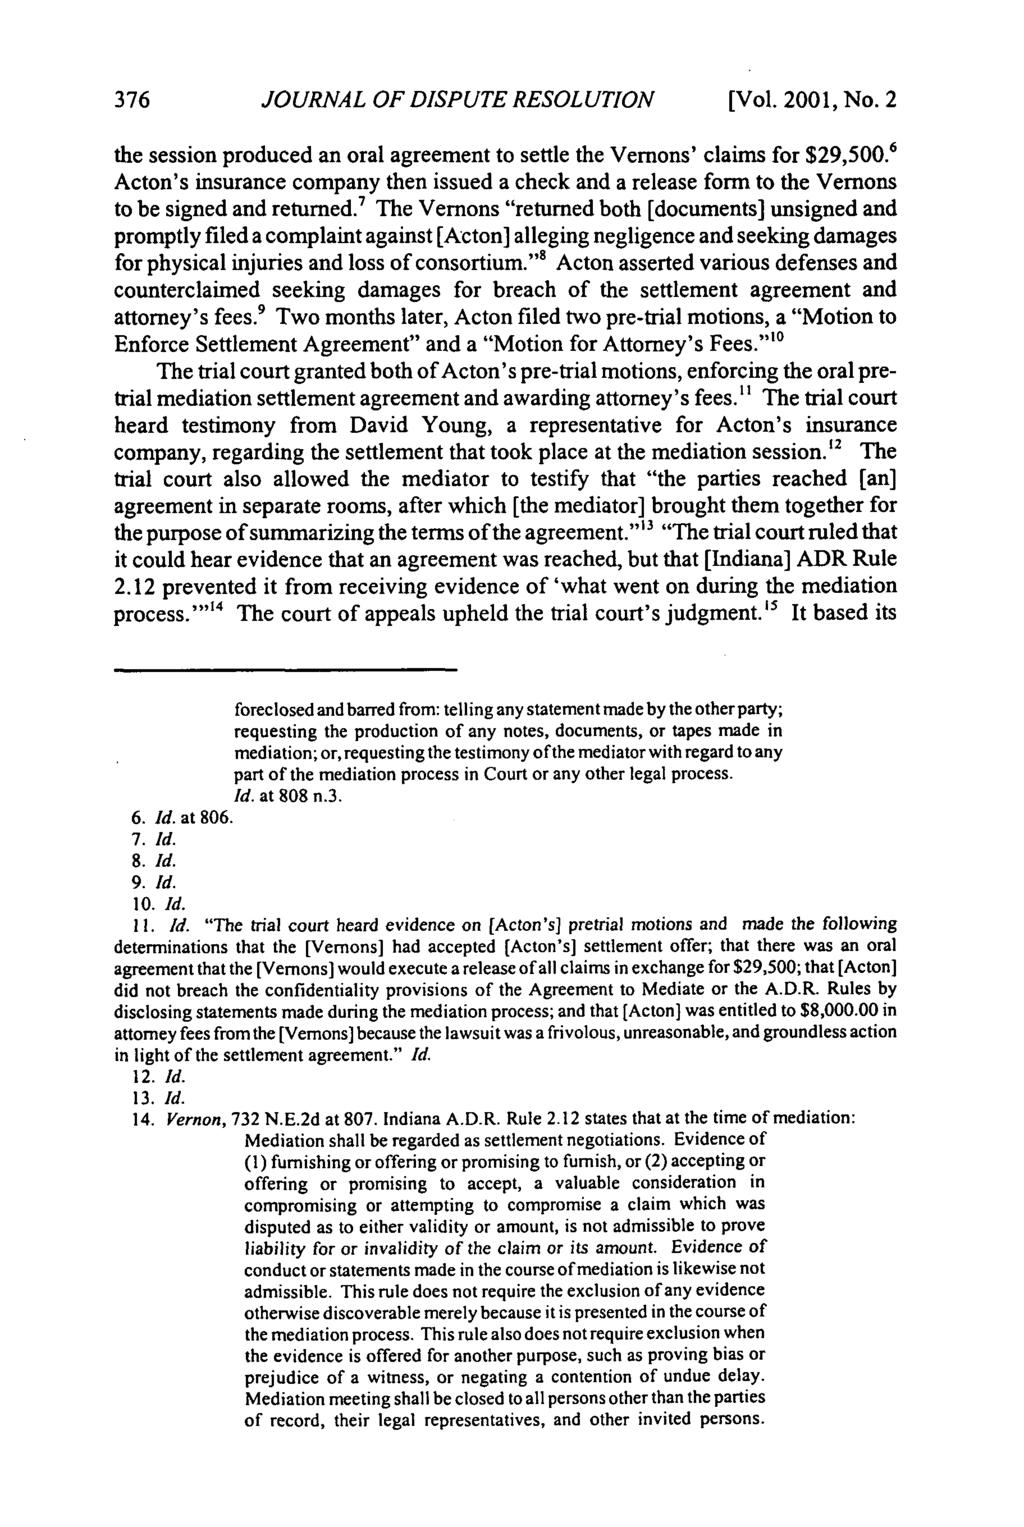 Journal of Dispute Resolution, Vol. 2001, Iss. 2 [2001], Art. 8 JOURNAL OF DISPUTE RESOLUTION [Vol. 2001, No. 2 the session produced an oral agreement to settle the Vemons' claims for $29,500.